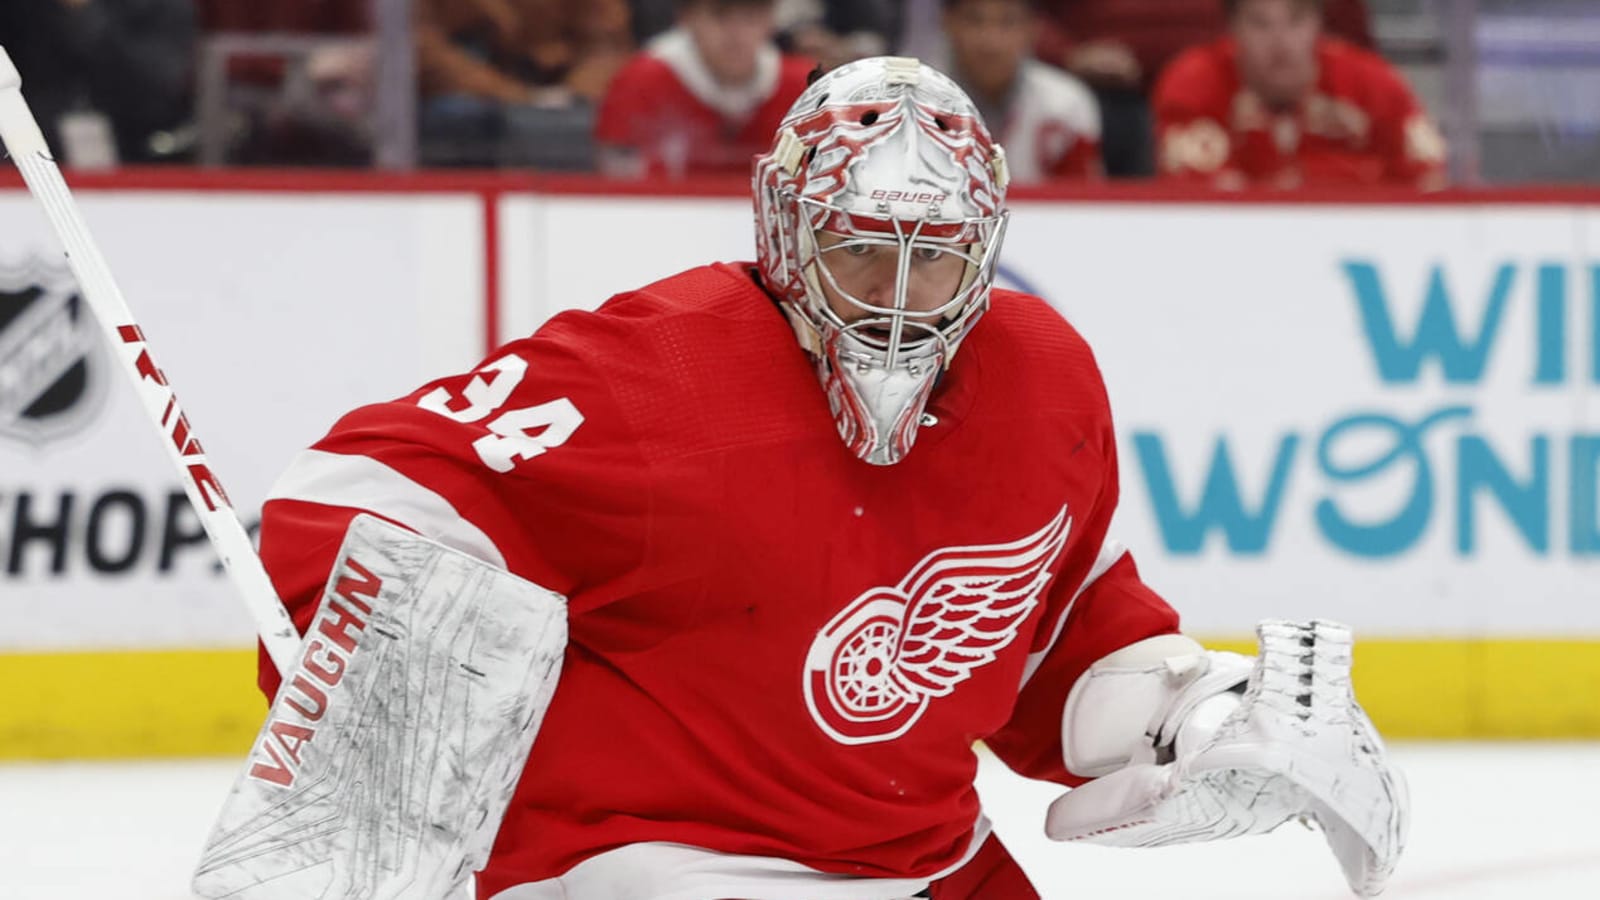 Red-hot Red Wings goalie has warning for team amid Stanley Cup hype